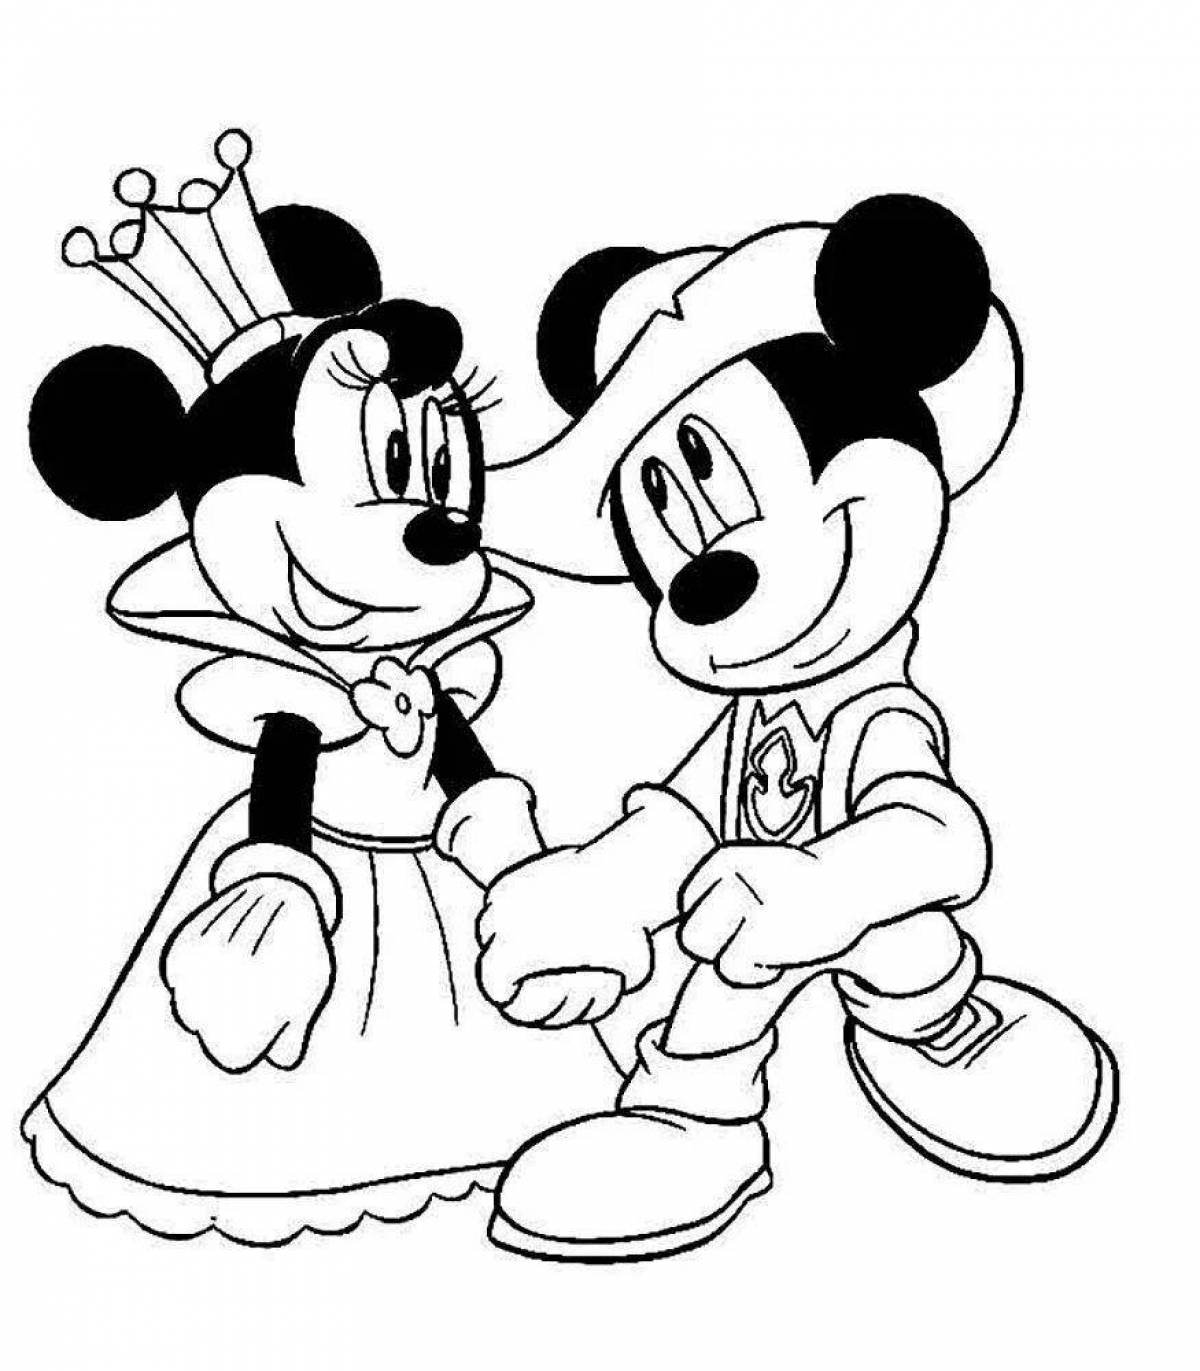 Adorable Minnie Mouse coloring book for kids